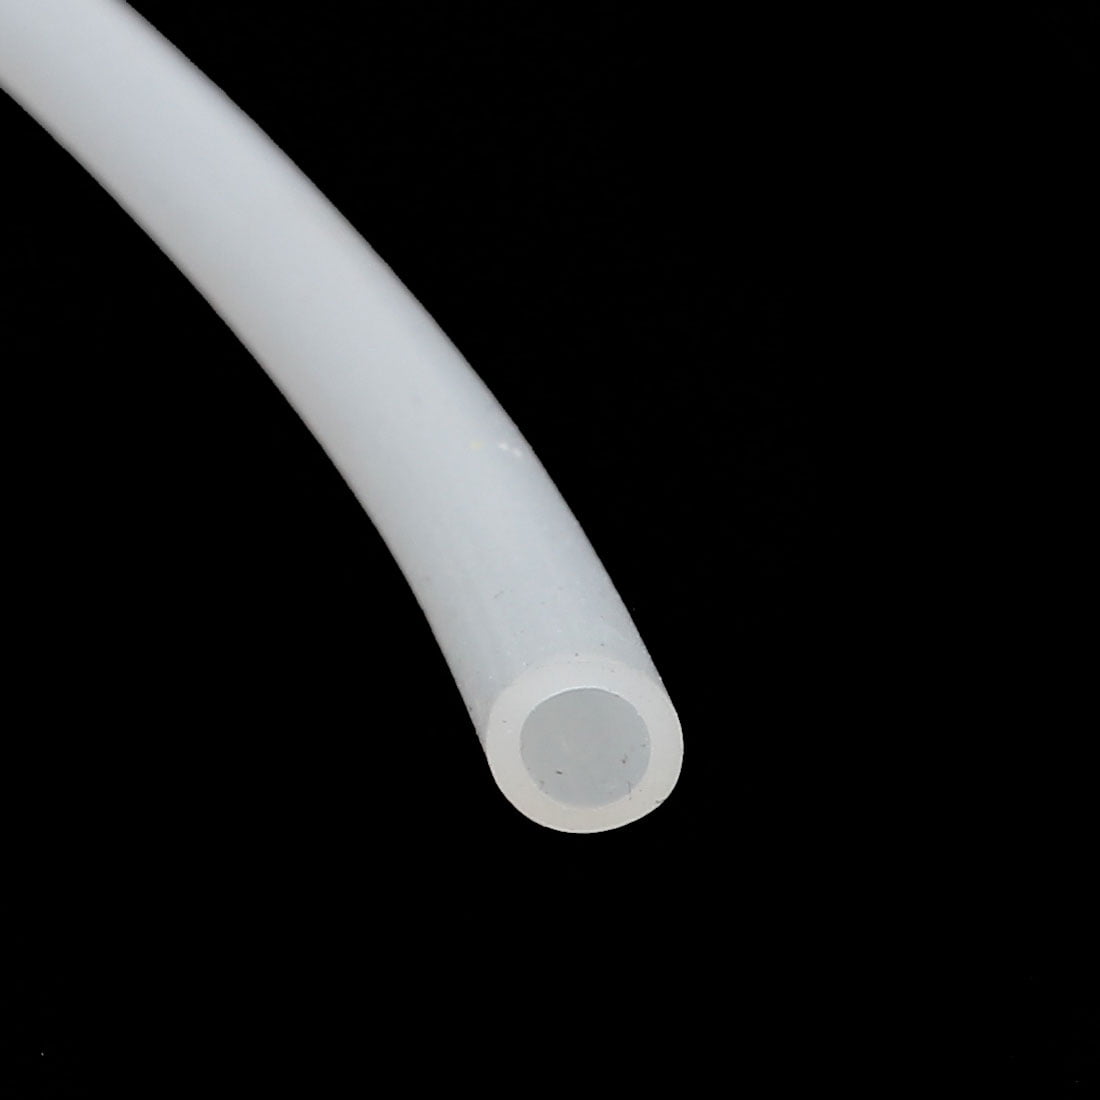 10Ft Length YXQ Silicone Tube 2mm ID 5mm OD Hose Rubber Flexible Clear Tubing Pipe Water Air for Pump Transfer 